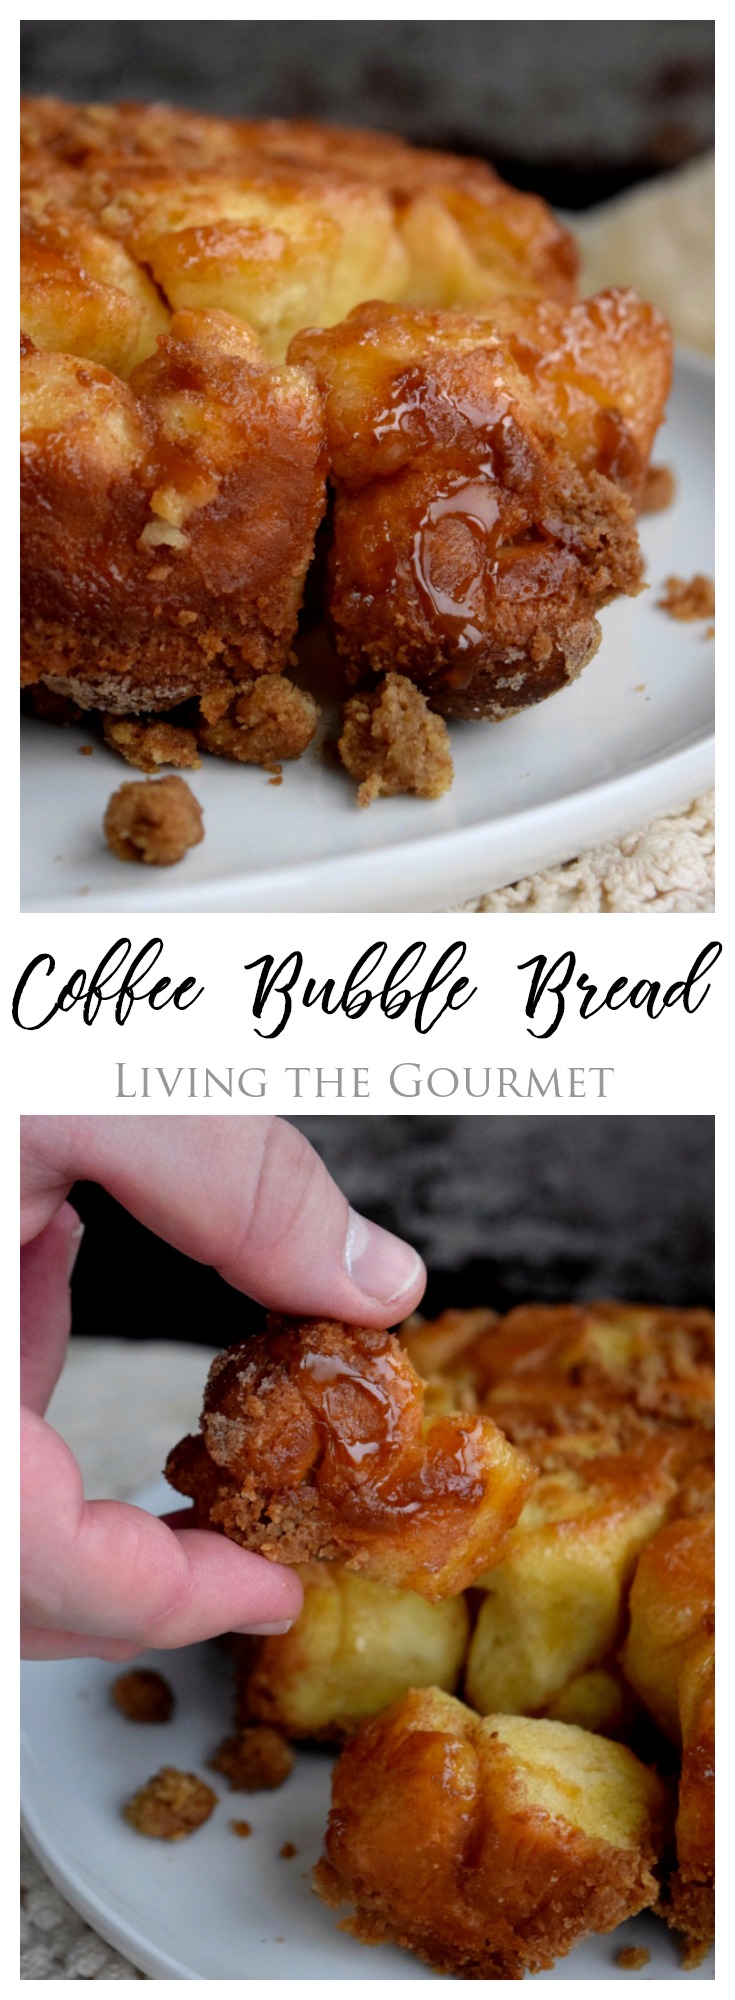 The mornings are getting chillier and the days are getting shorter, time to break out those cozy knit sweaters and get out baking game on. This Coffee Bubble Bread is a cross between coffee cake and monkey bread. It's sweet, sticky and perfect in the AM with your favorite cup of java.